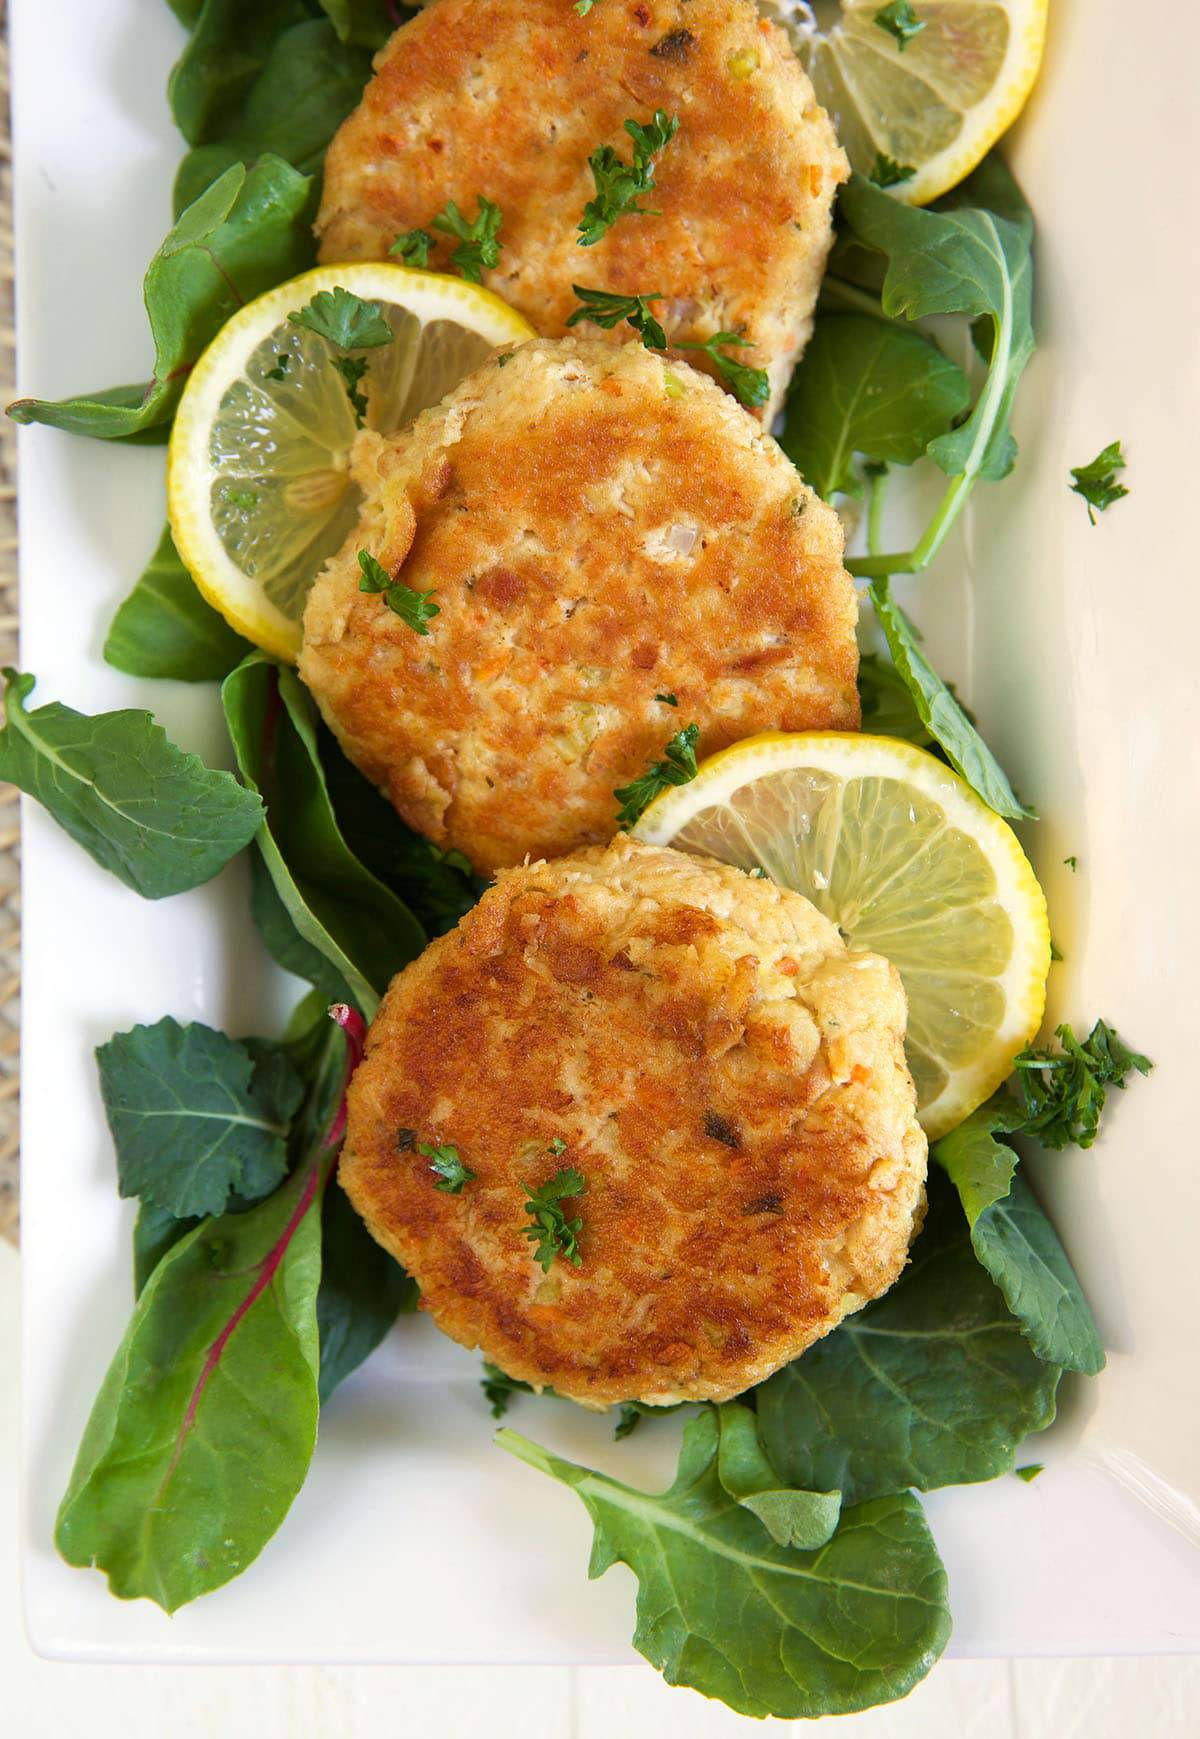 Tuna patties are placed on a plate next to lemon slices and leafy greens.